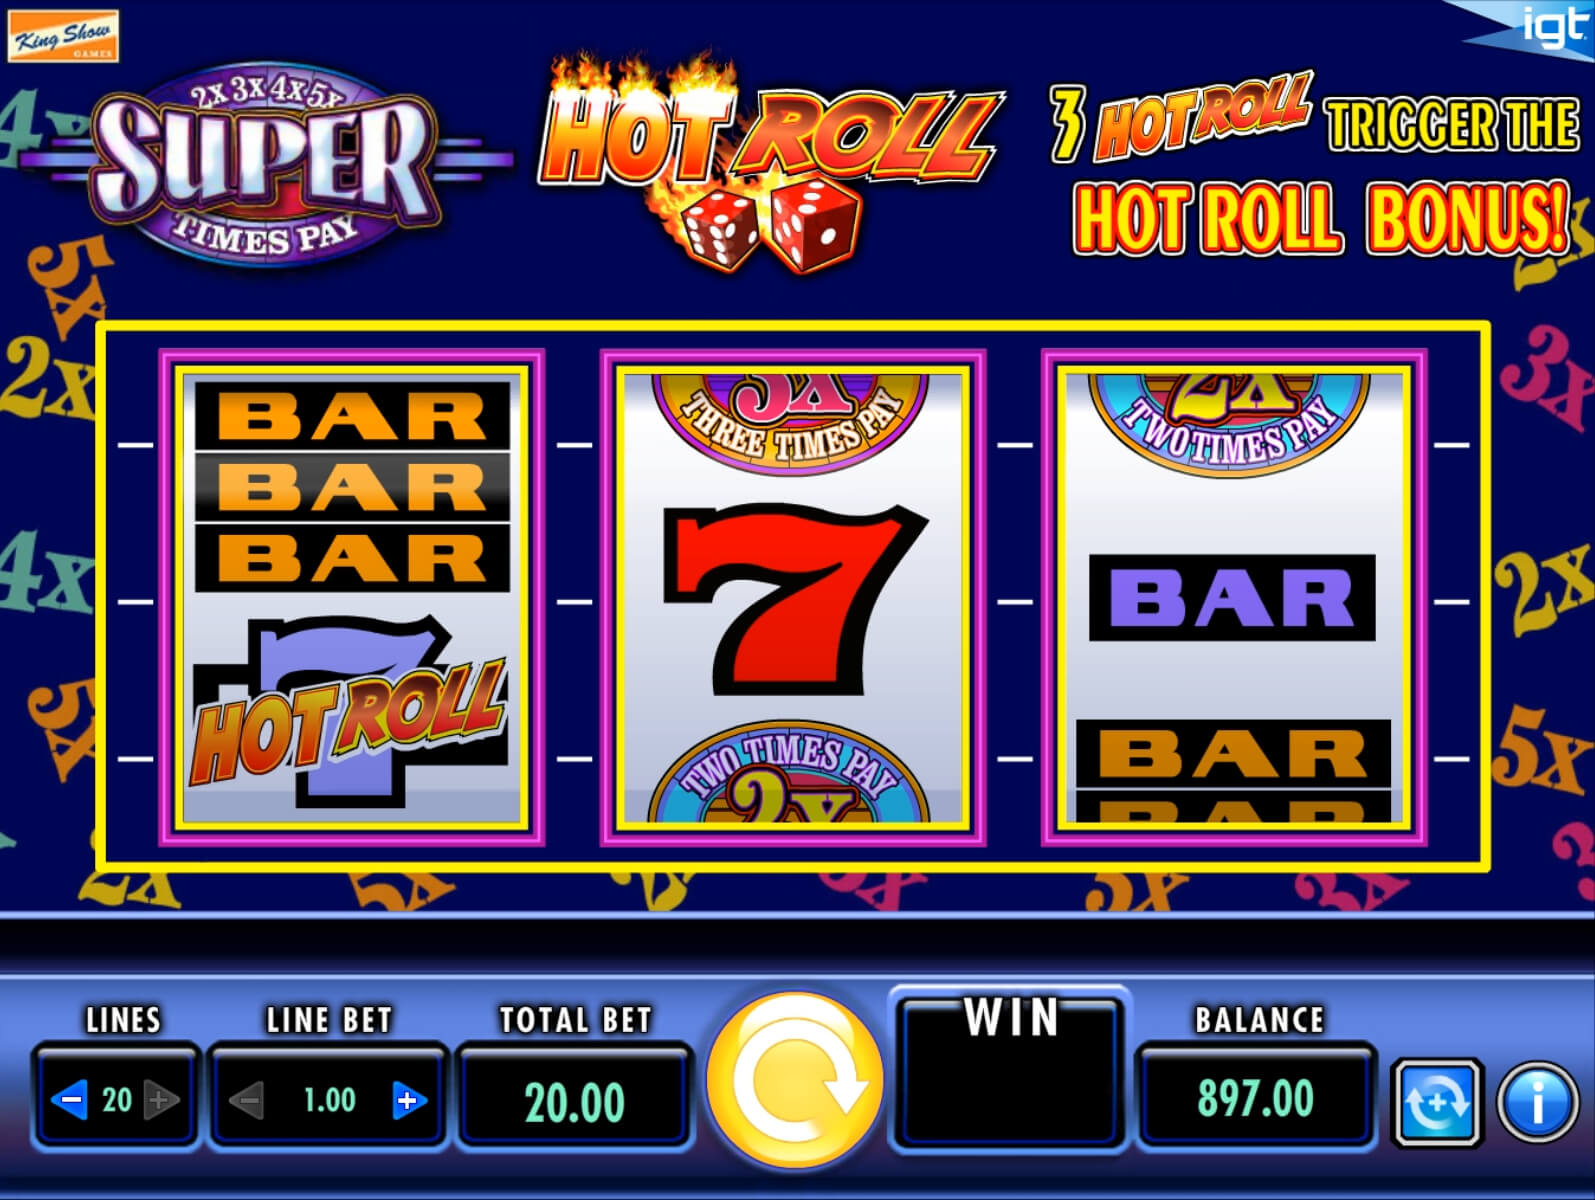 Screenshot of the game: Hot Rolls Super Times Pay